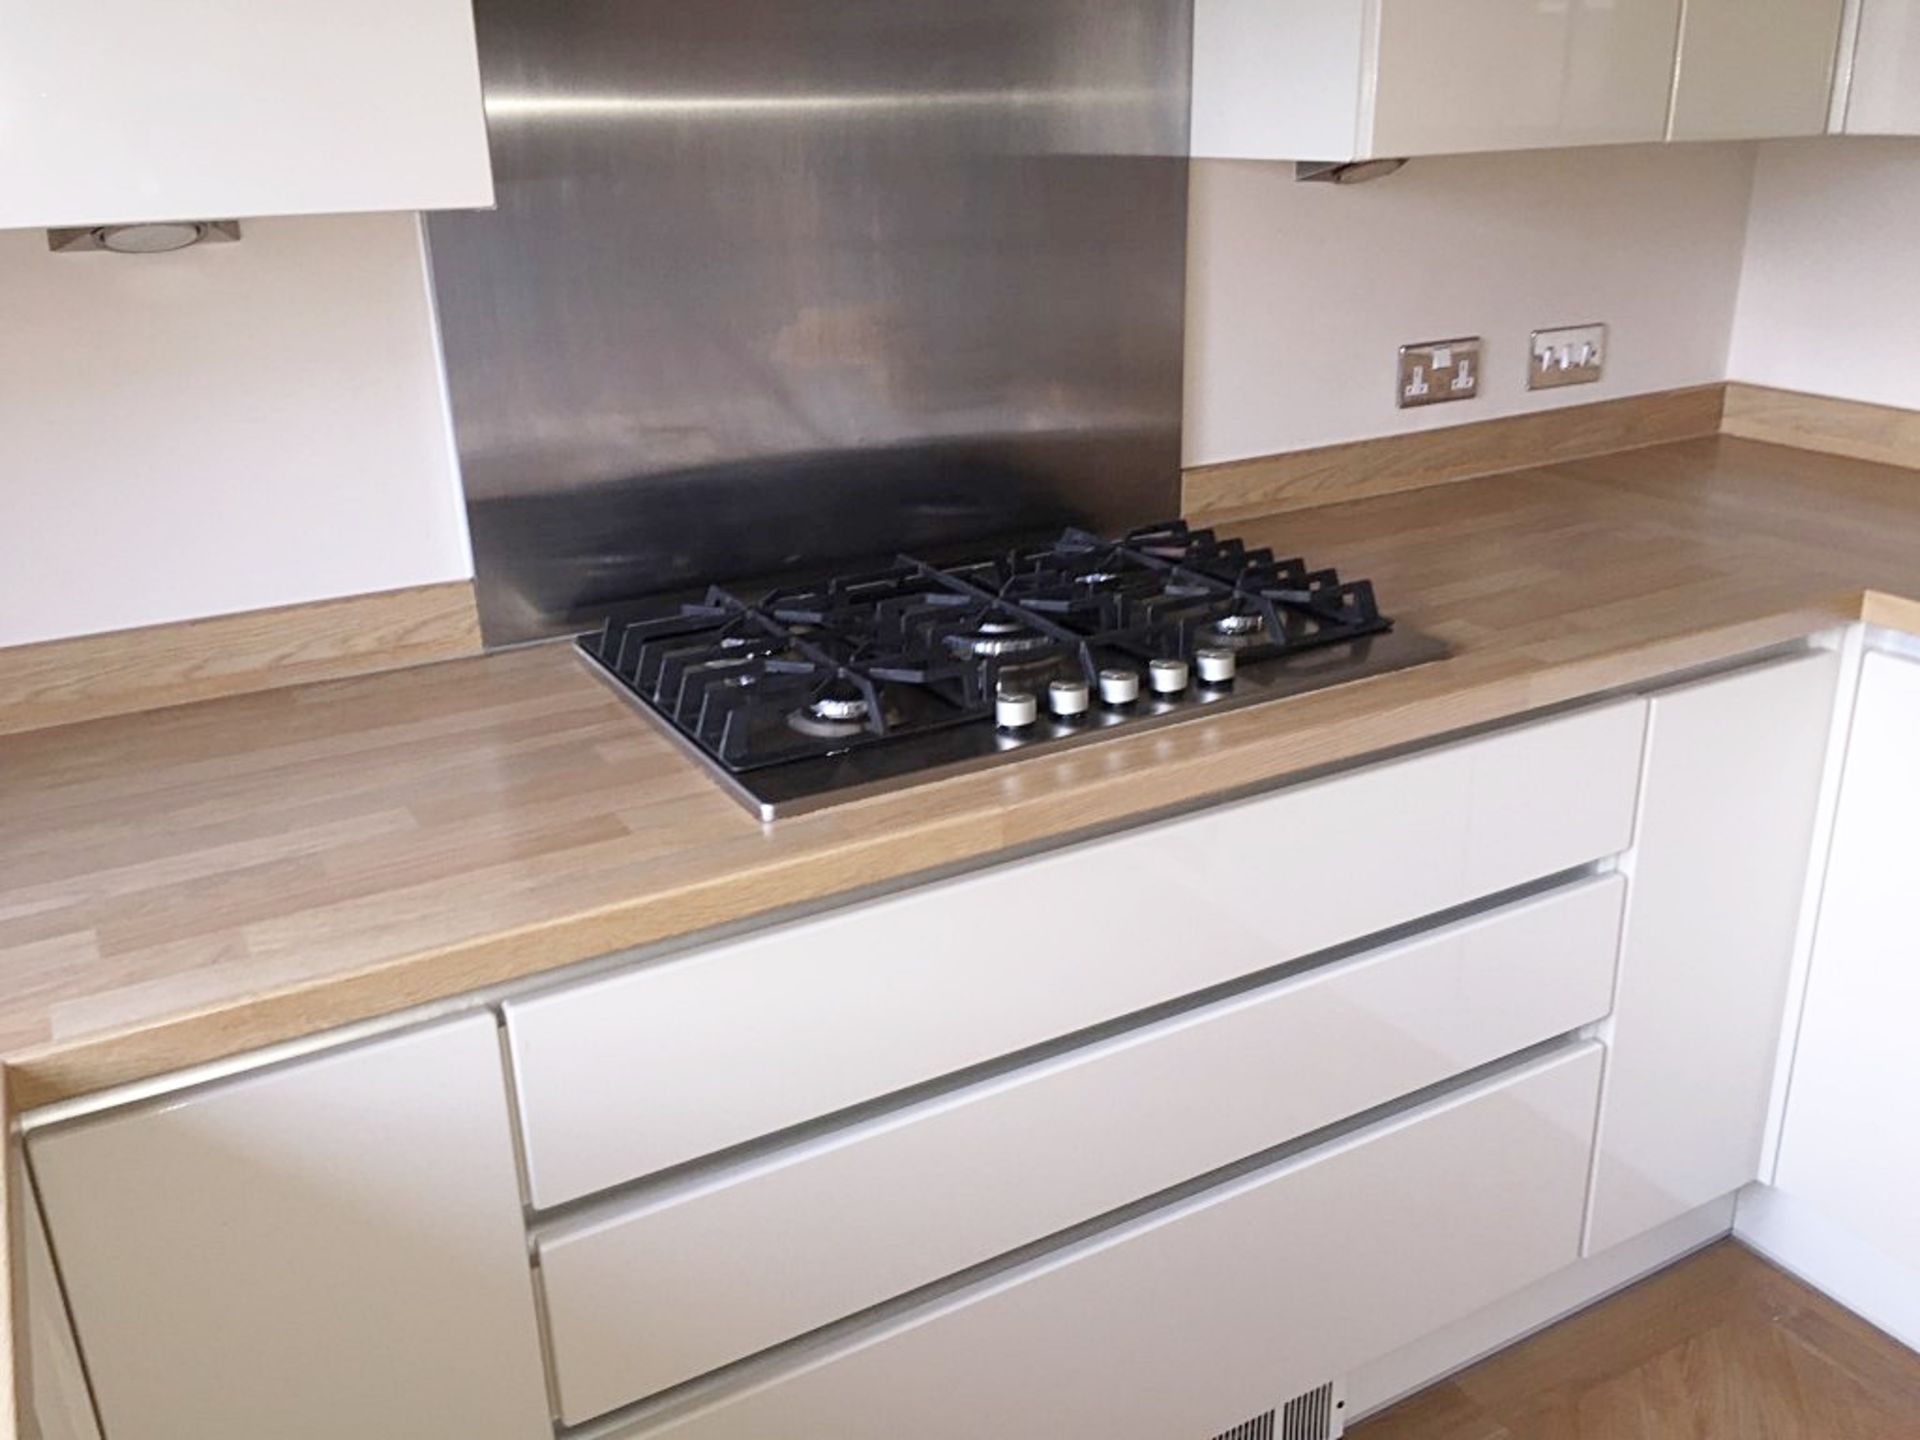 1 x Panorama Modern White Gloss Handless Kitchen With Timber Worktop And Appliances – Approx 2 years - Image 8 of 40